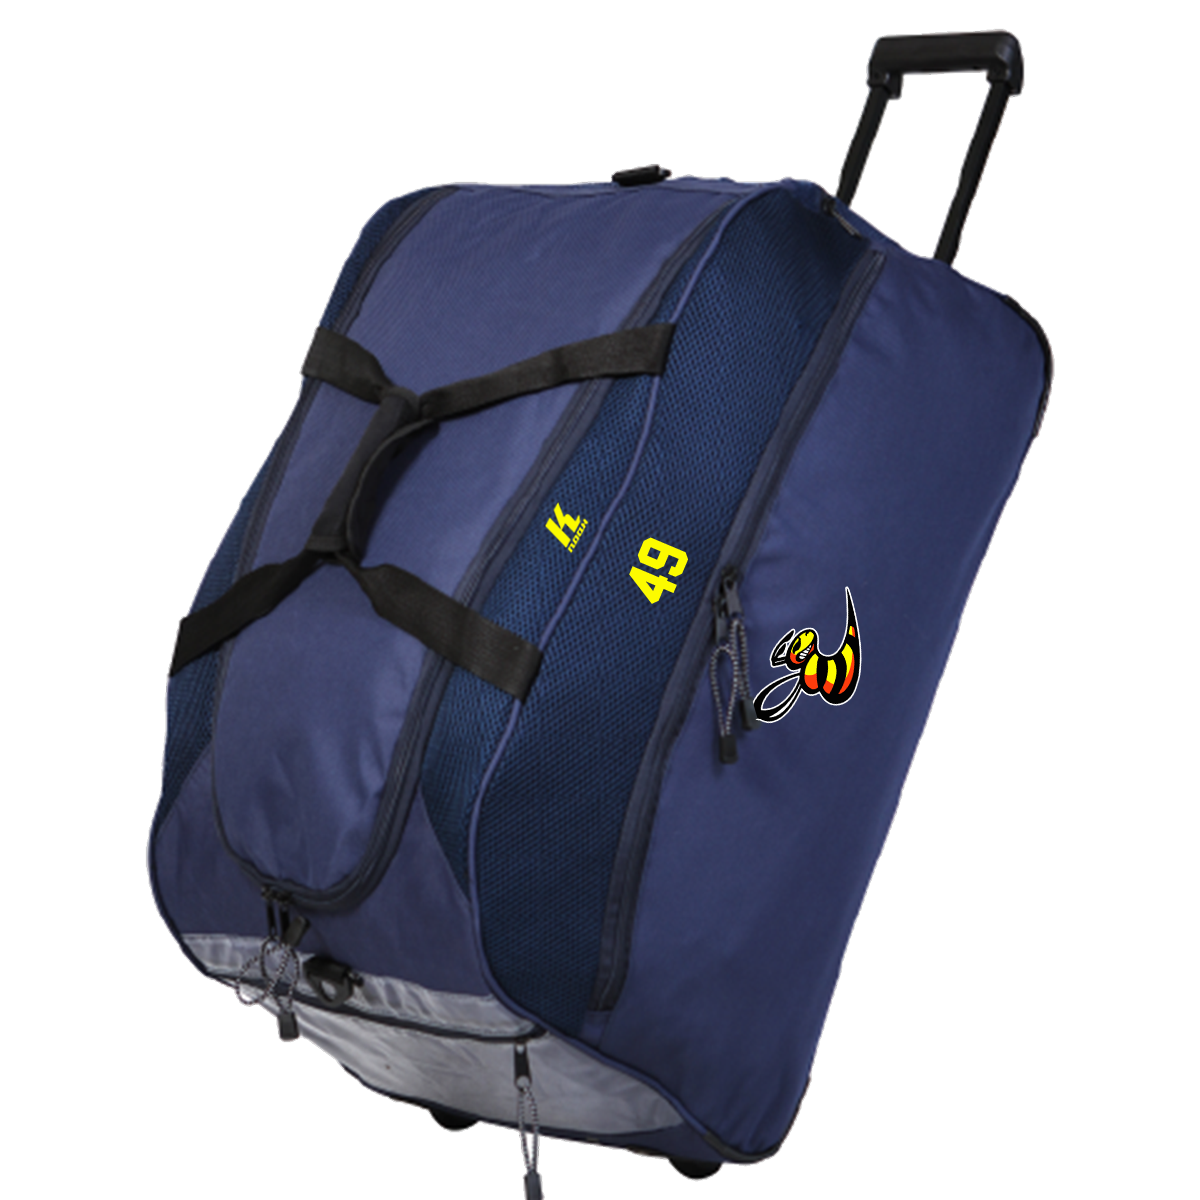 Hornets Wheelie Team Kitbag with Playernumber or Initials